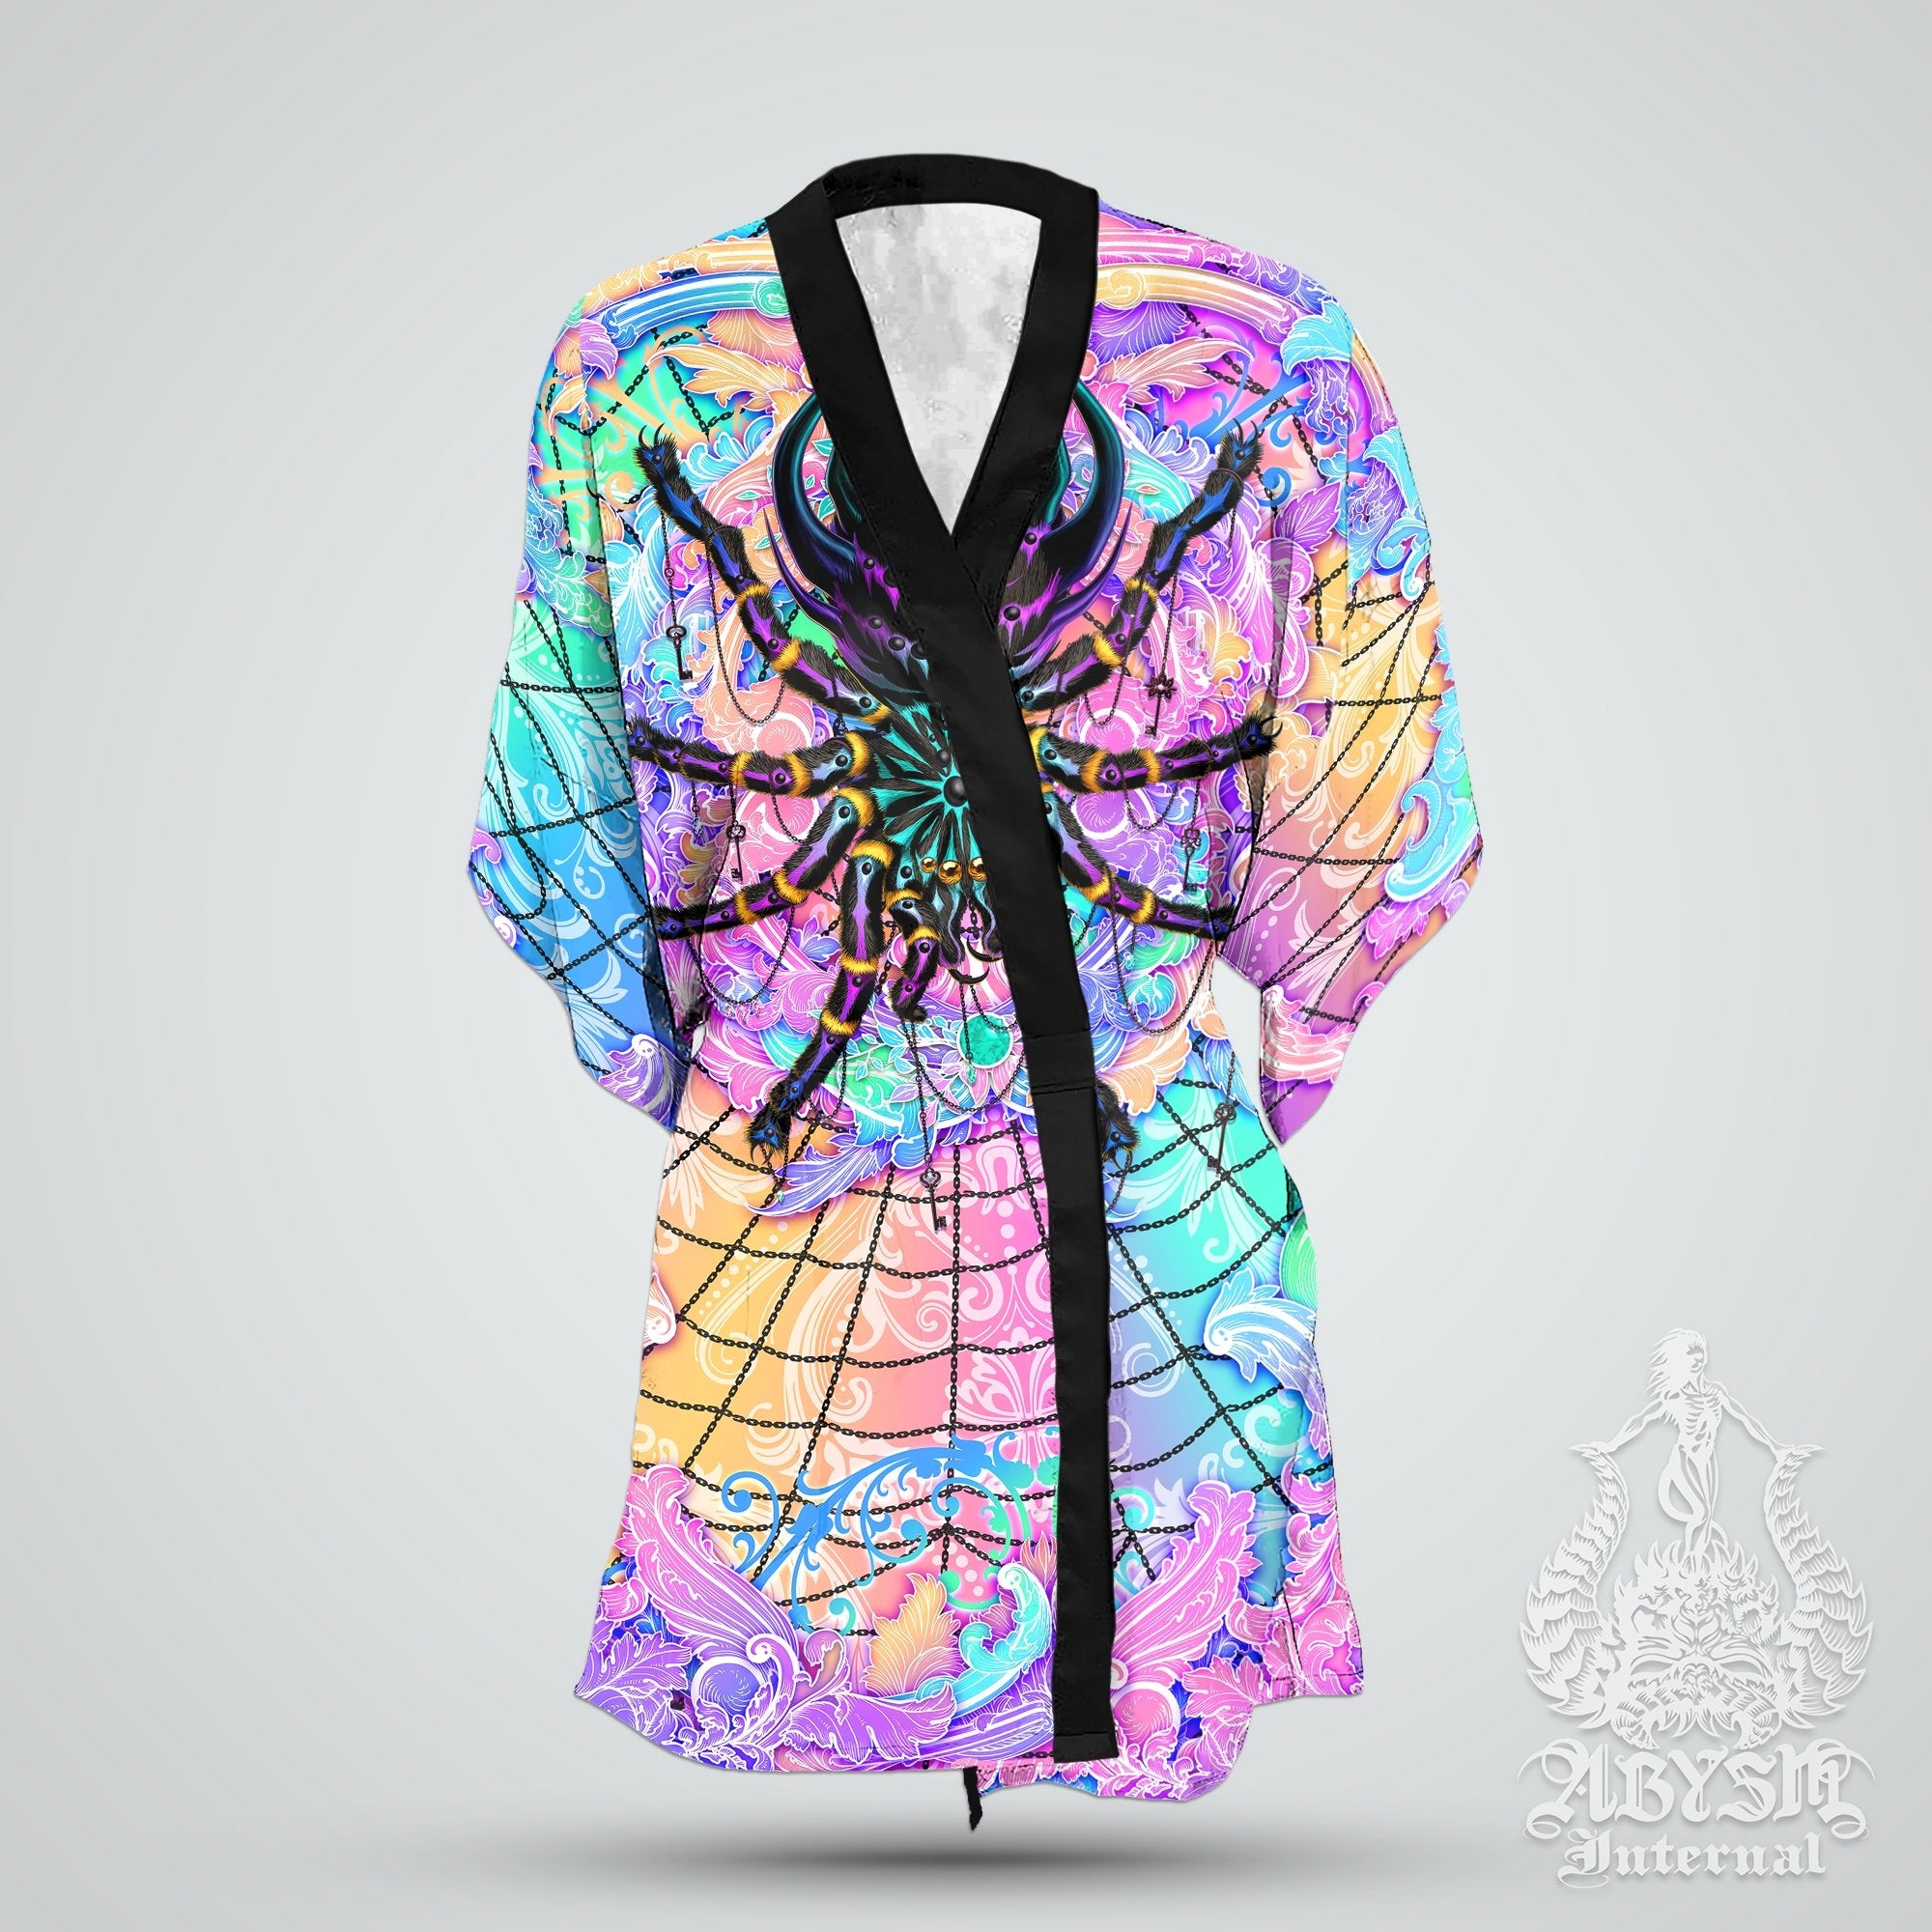 Psychedelic Cover Up, Aesthetic Pastel Punk, Beach Rave Outfit, Rave Party Kimono, Summer Festival Robe, Holographic Clothing, Unisex - Black Tarantula Spider - Abysm Internal